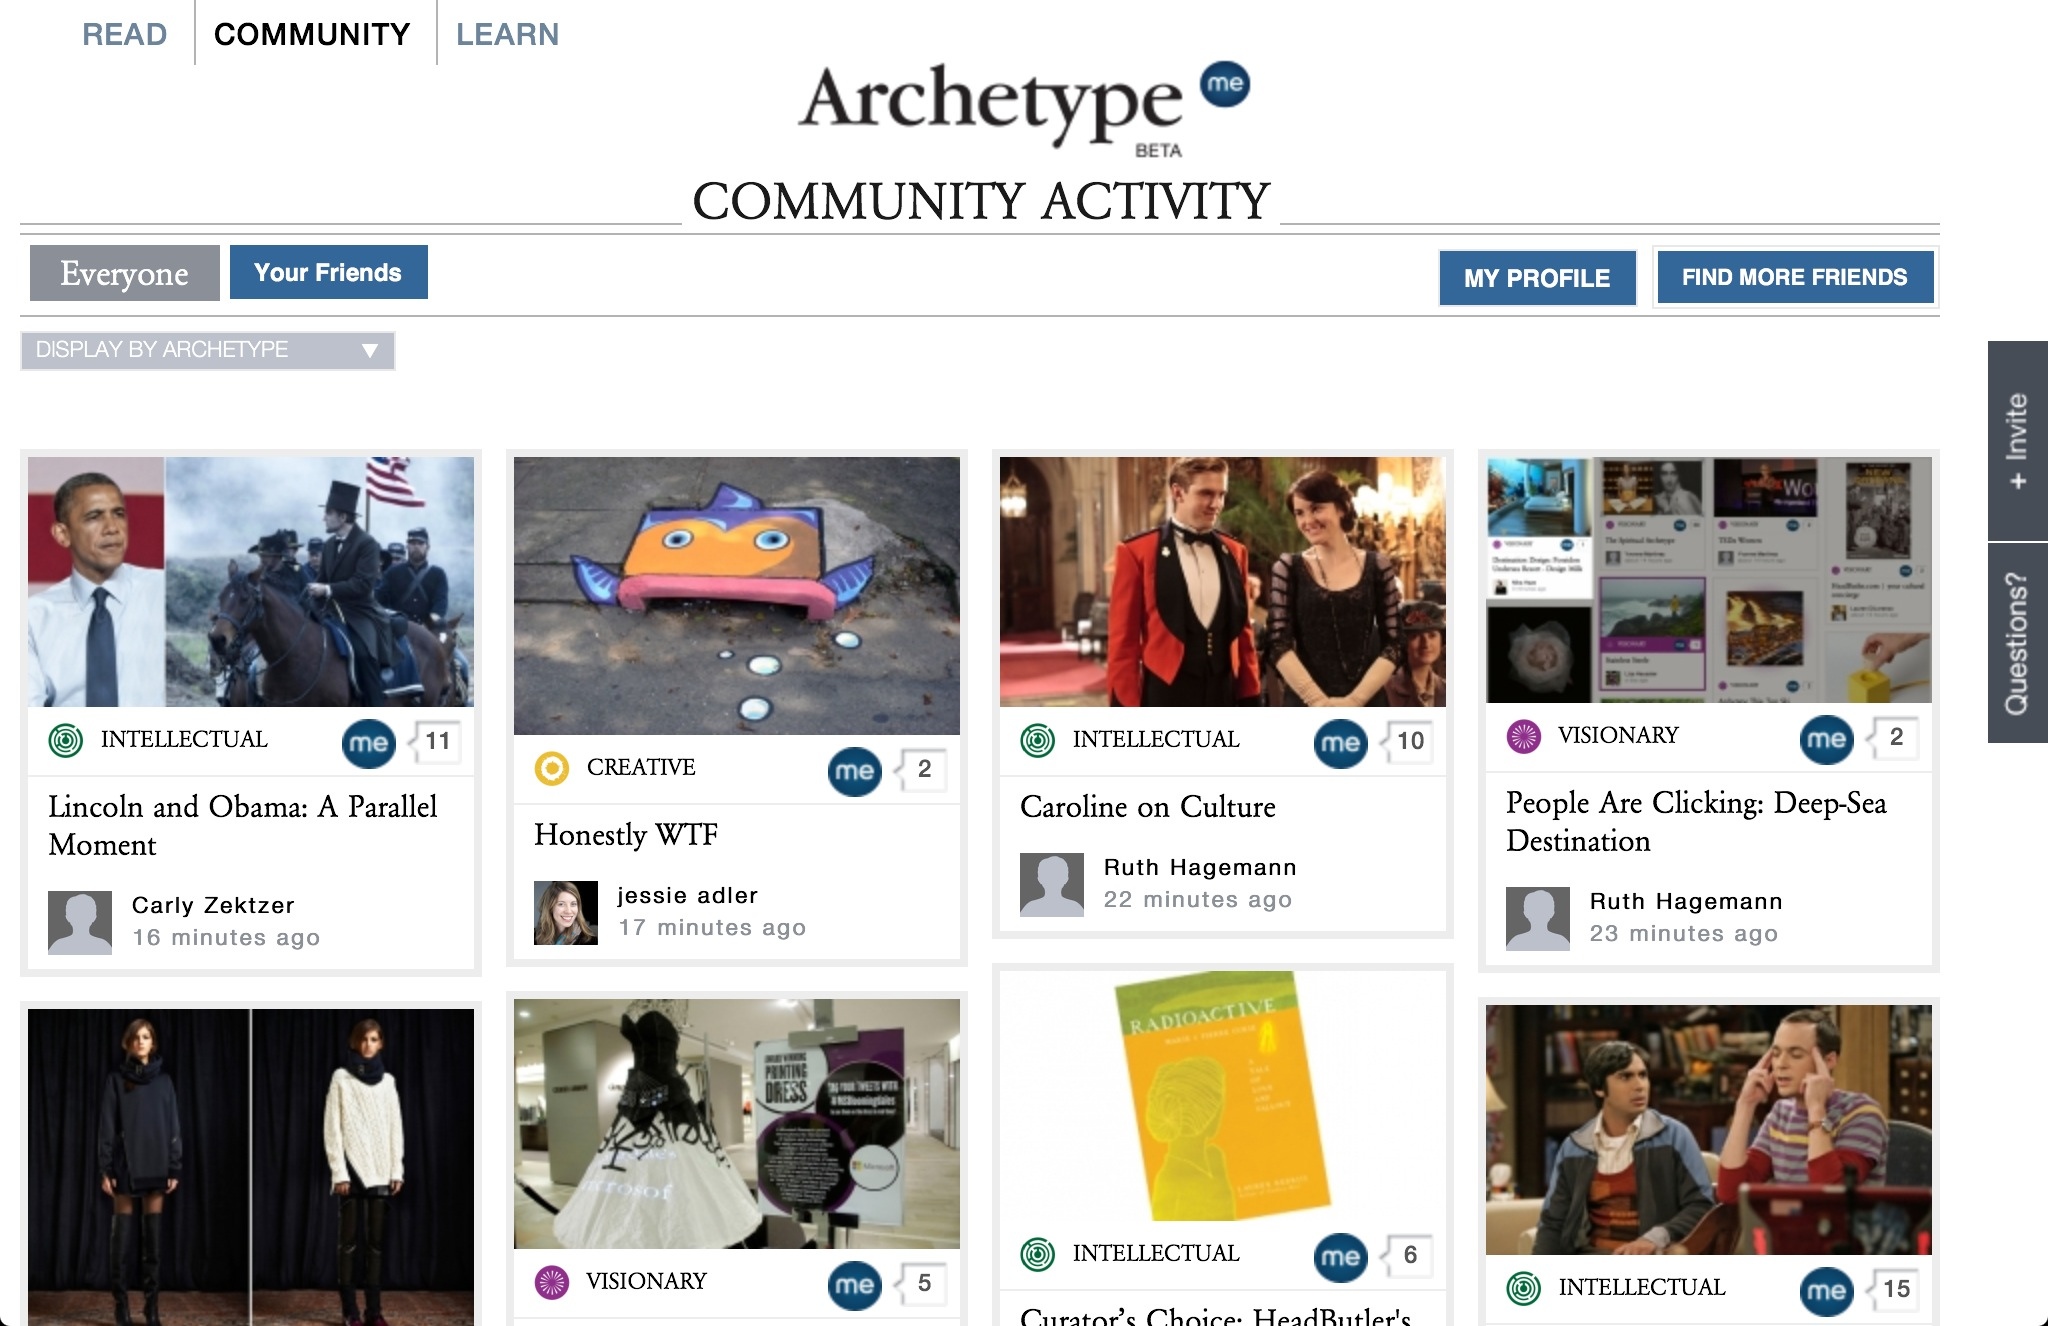 ArchetypeMe Makes Finding New Content Fun and Personal